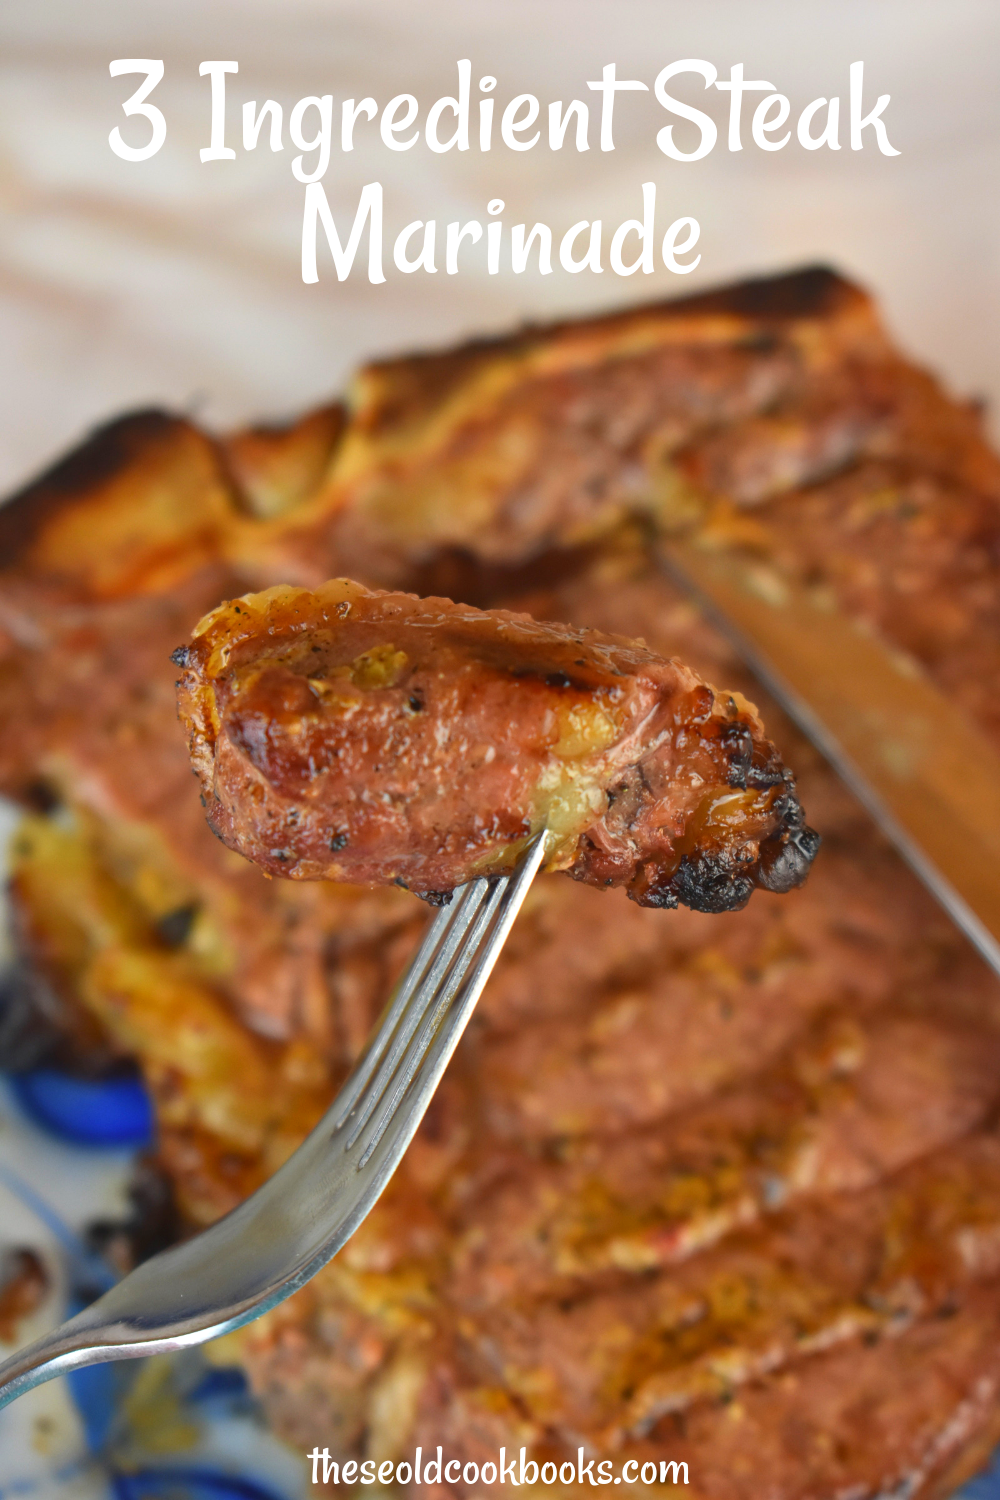 We have the easiest 3 ingredient steak marinade for you, and we are betting you already have the ingredients on hand---ground black pepper, bottled Italian dressing, and Dijon mustard. Your steak with be tender and flavorful every single time.